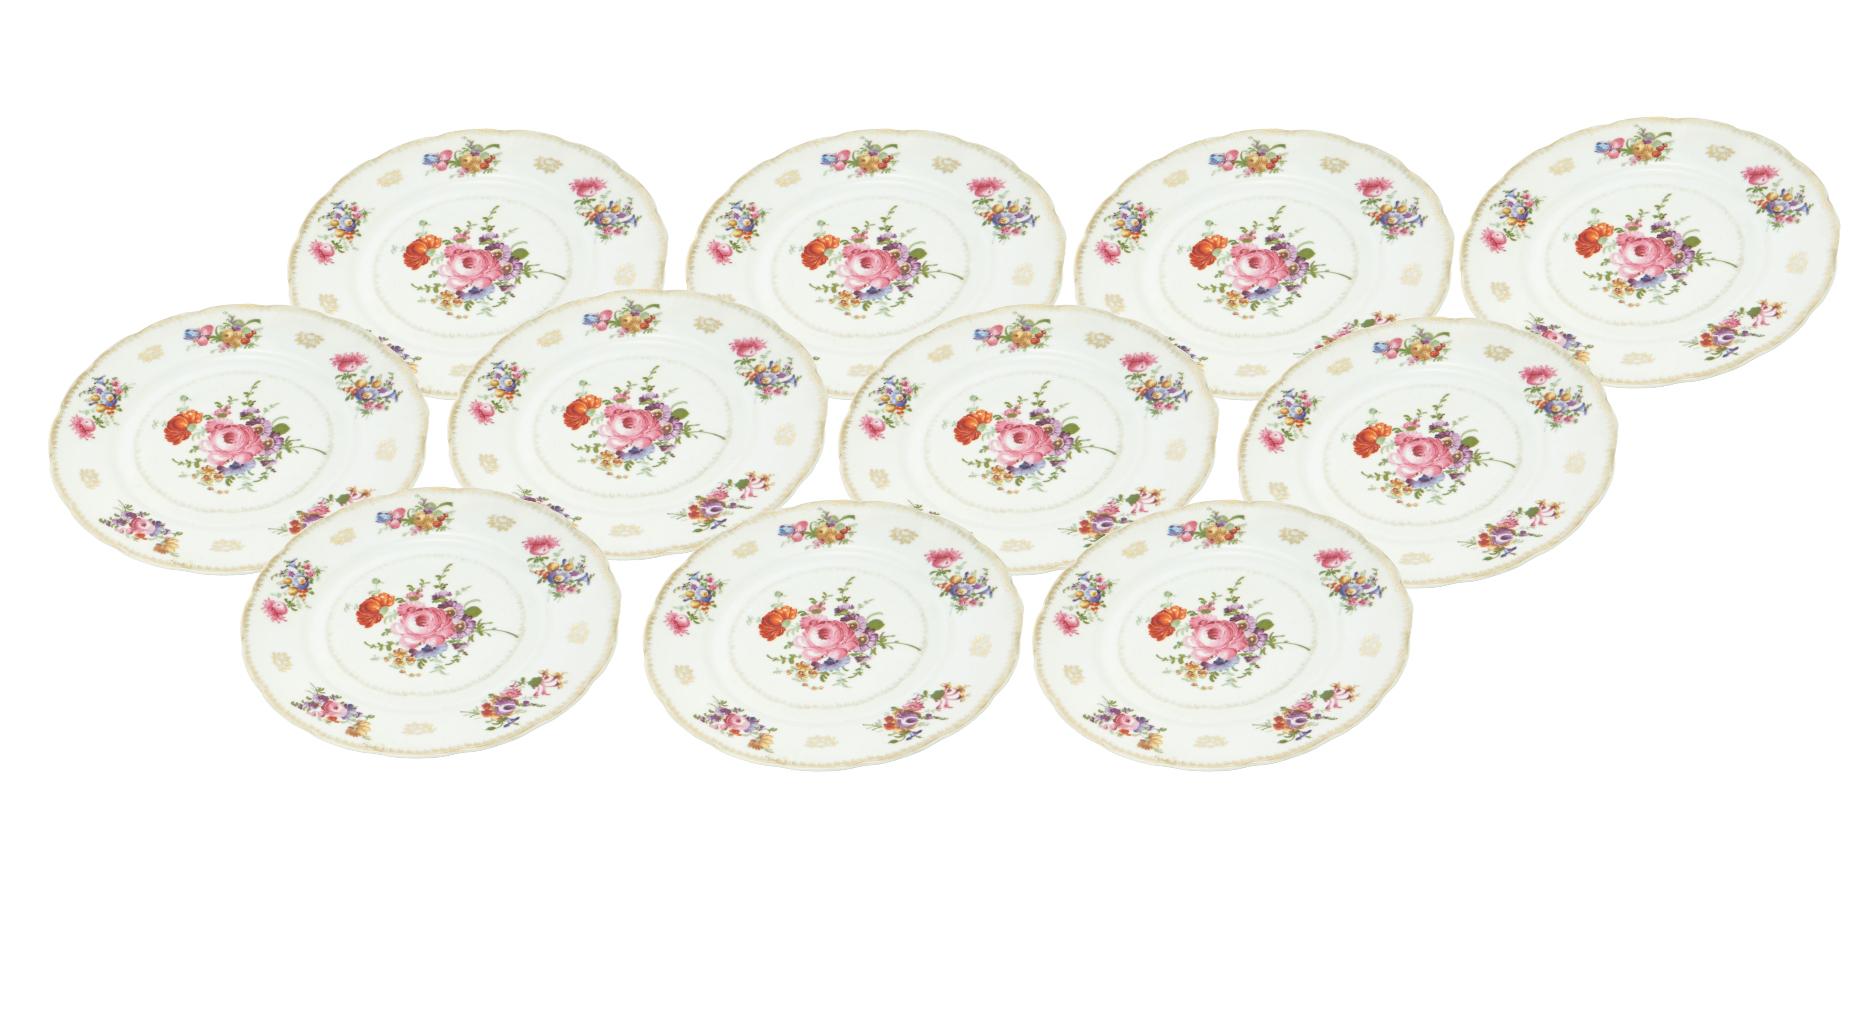 Dine in timeless elegance with our Porcelain Painted and Gilt Floral Bouquet Decorated Set of Eleven Dinner Plates, a stunning creation from the mid-20th century by Coronet Chinaware Co in the Czech Republic. Each plate is a masterpiece, featuring a